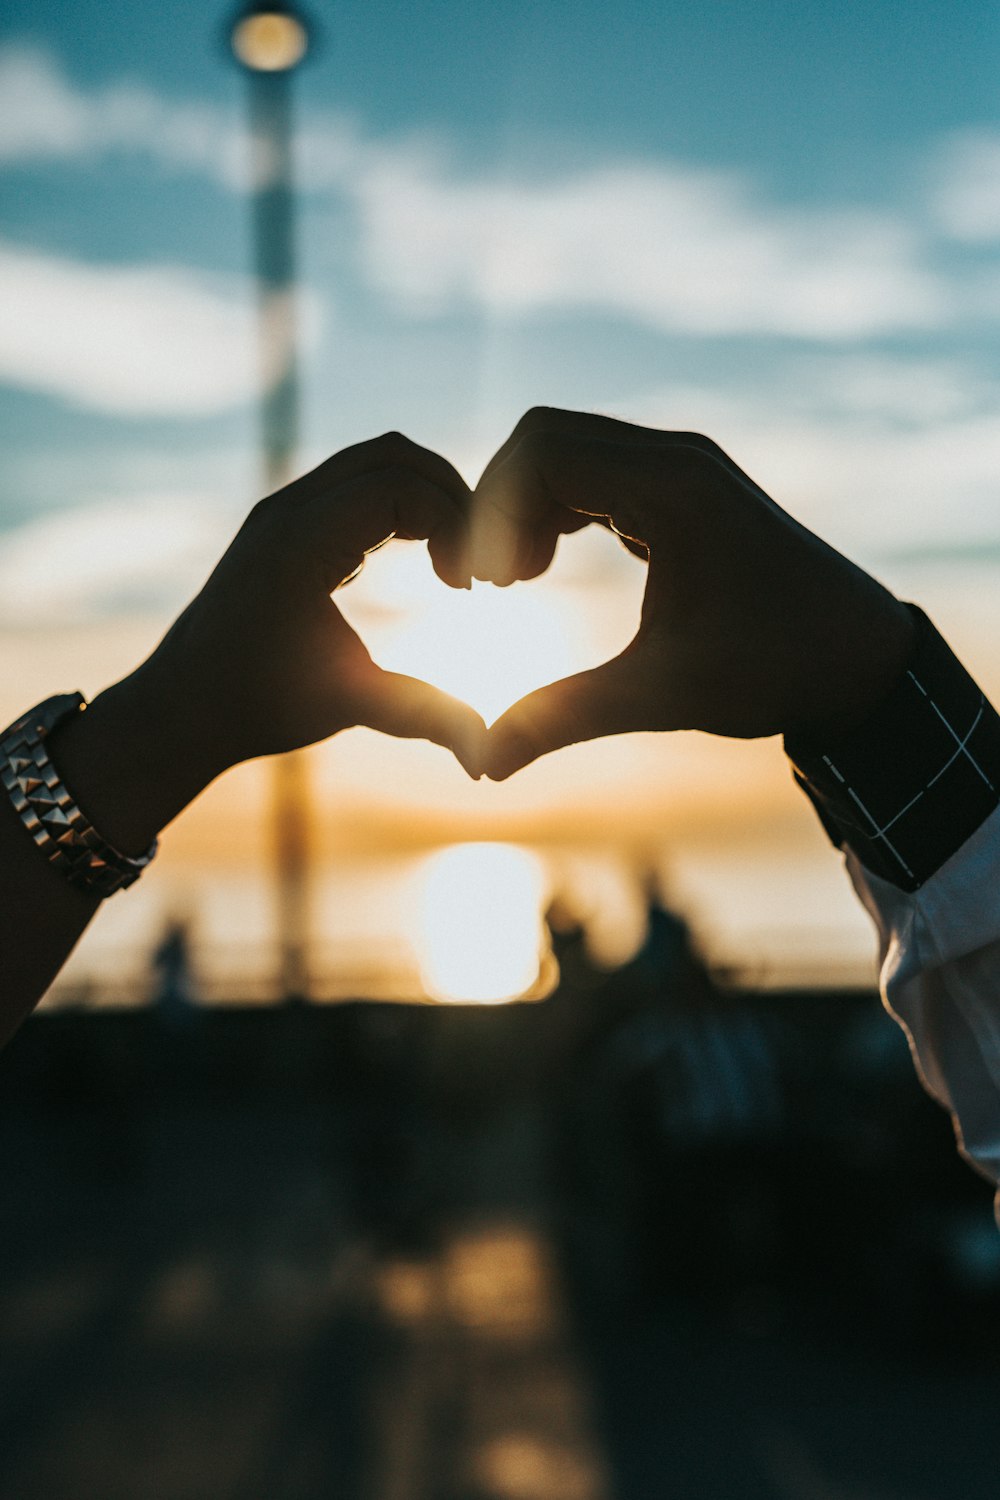 750+ True Love Pictures | Download Free Images on Unsplash